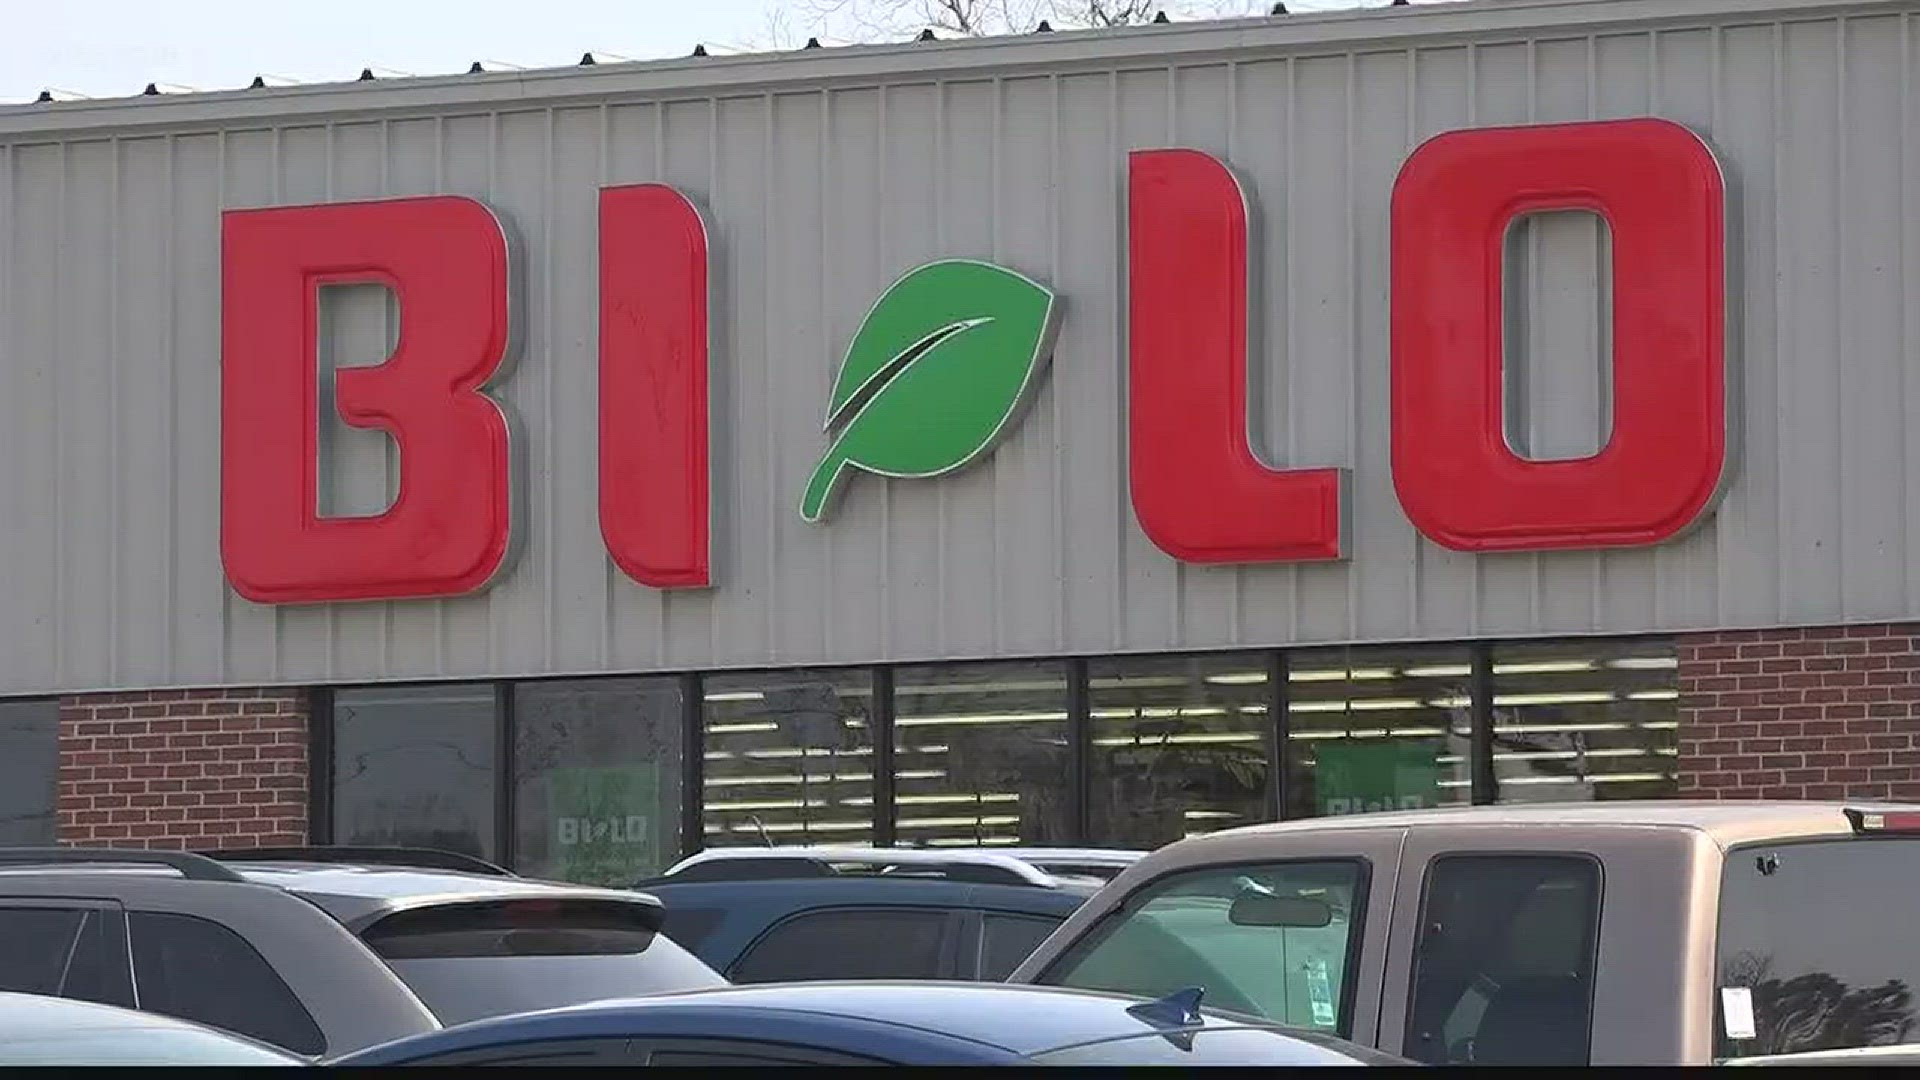 Five Harveys or Bi-Lo locations in the Midlands will shut down as part of the company's plan.